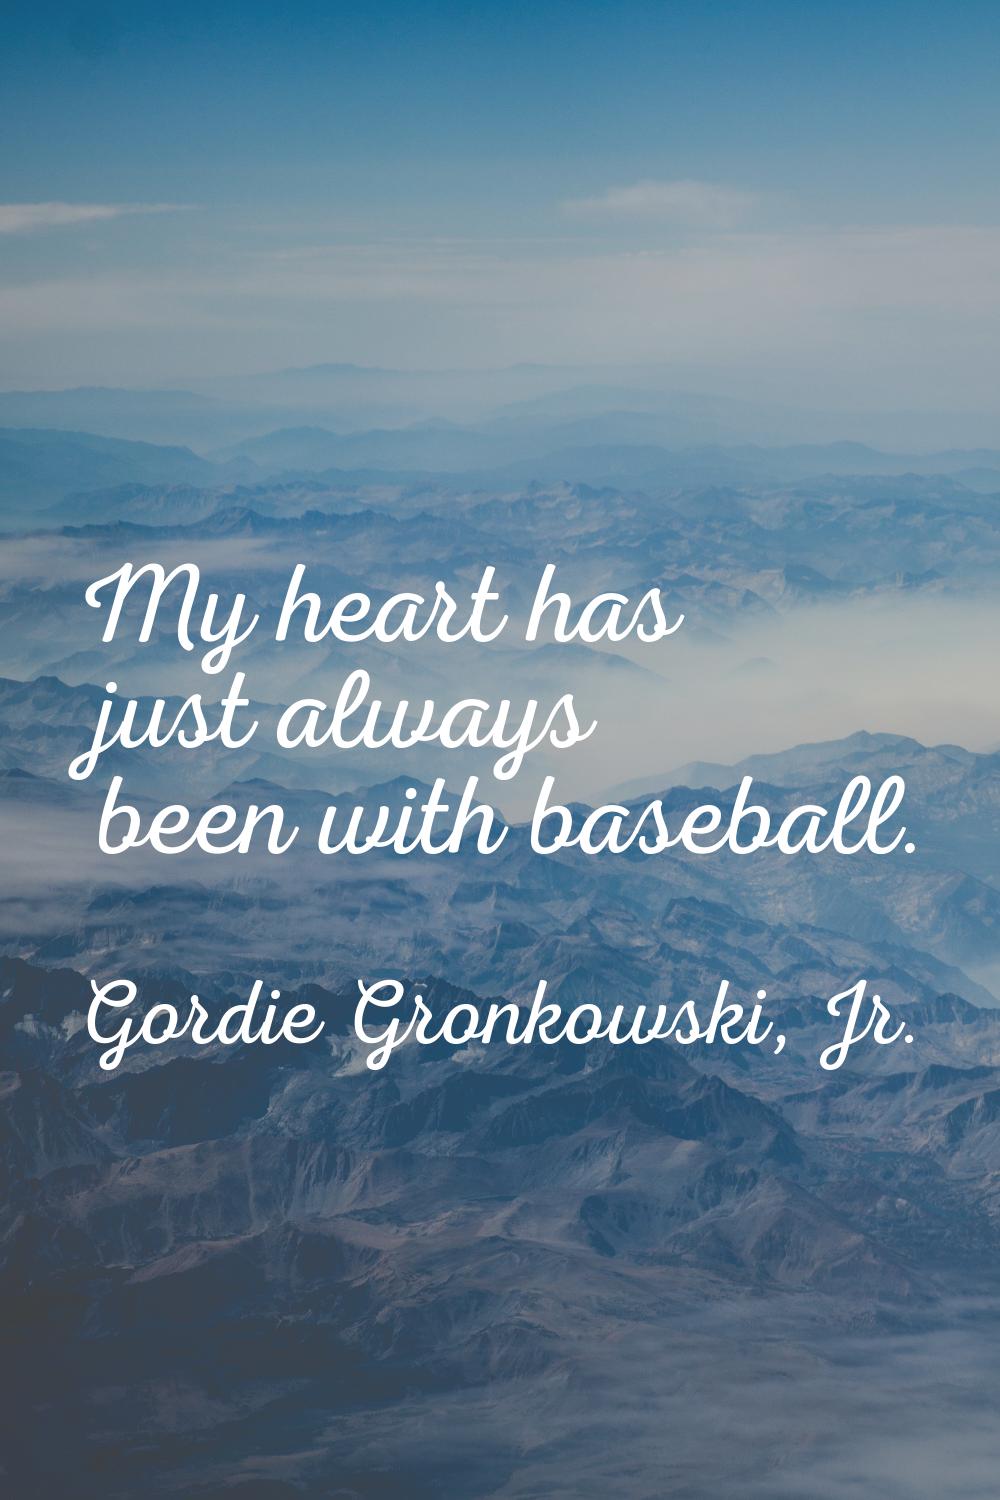 My heart has just always been with baseball.